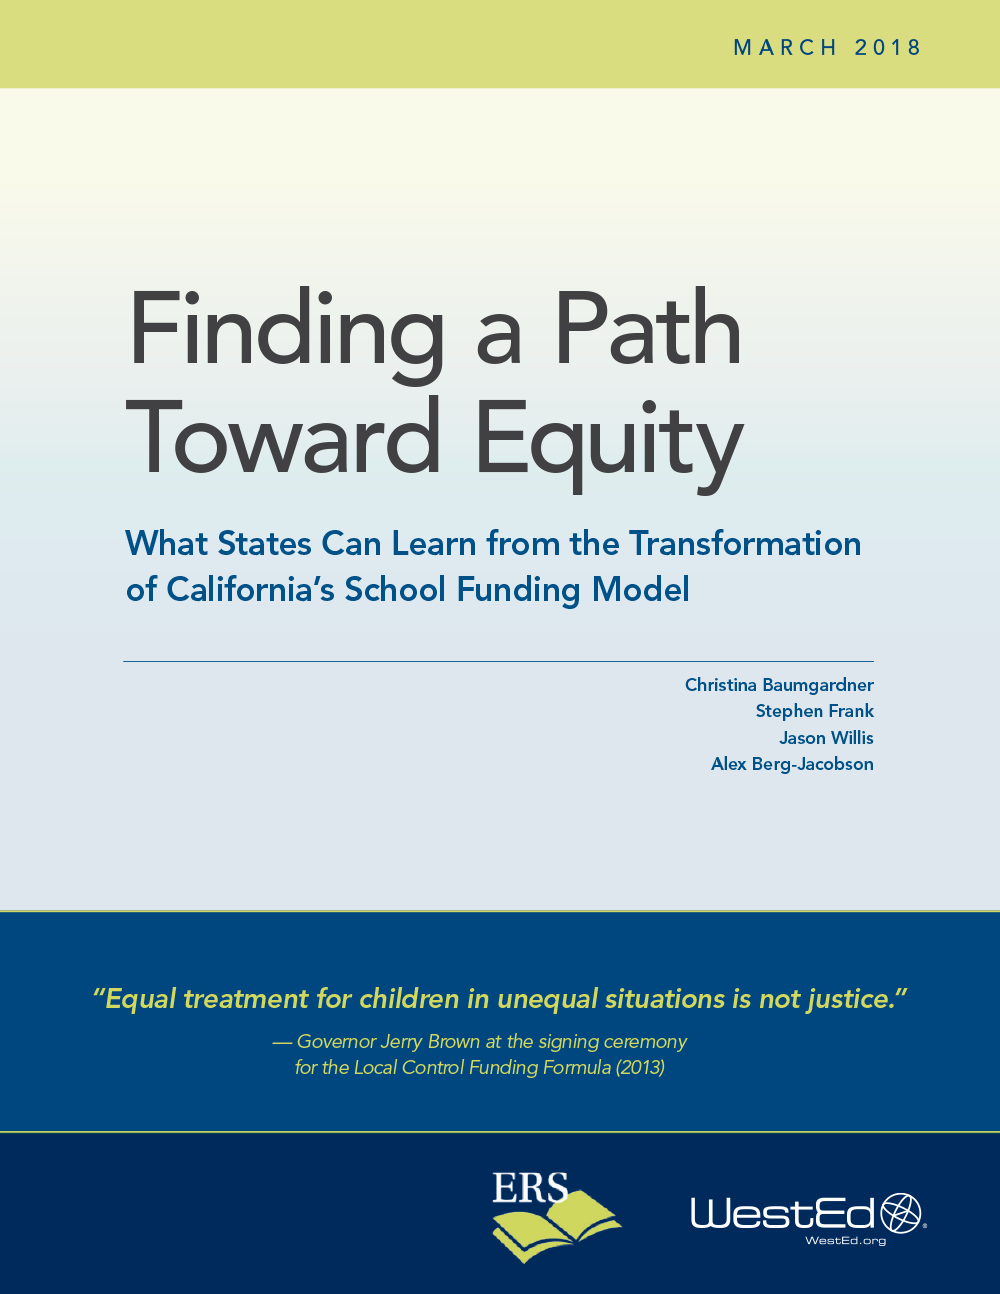 Finding a Path Toward Equity: What States Can Learn from the Transformation of California’s School Funding Model